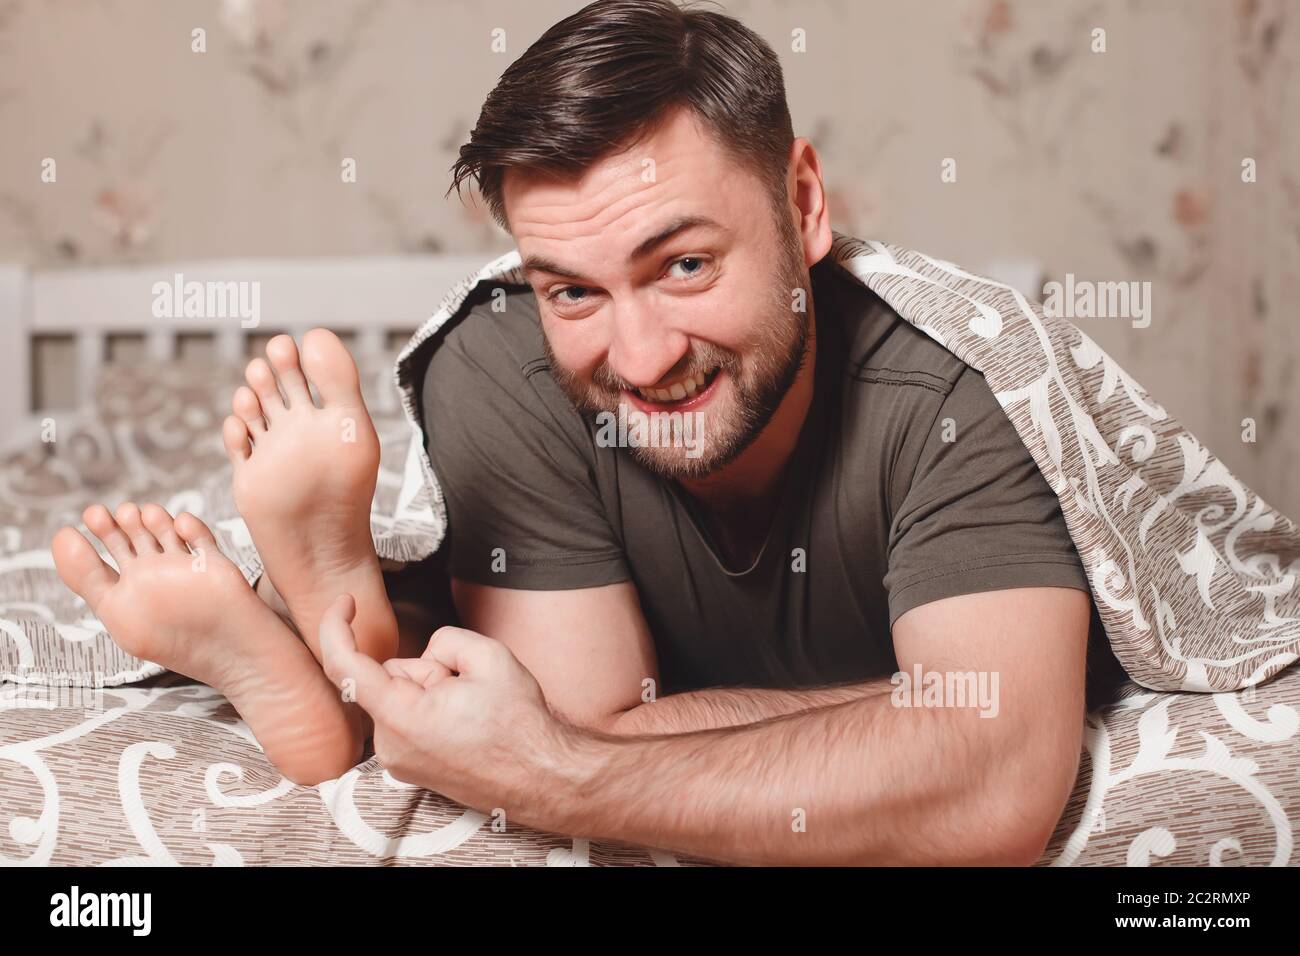 Playful man trying to tickle woman's feet in bed. Stock Photo